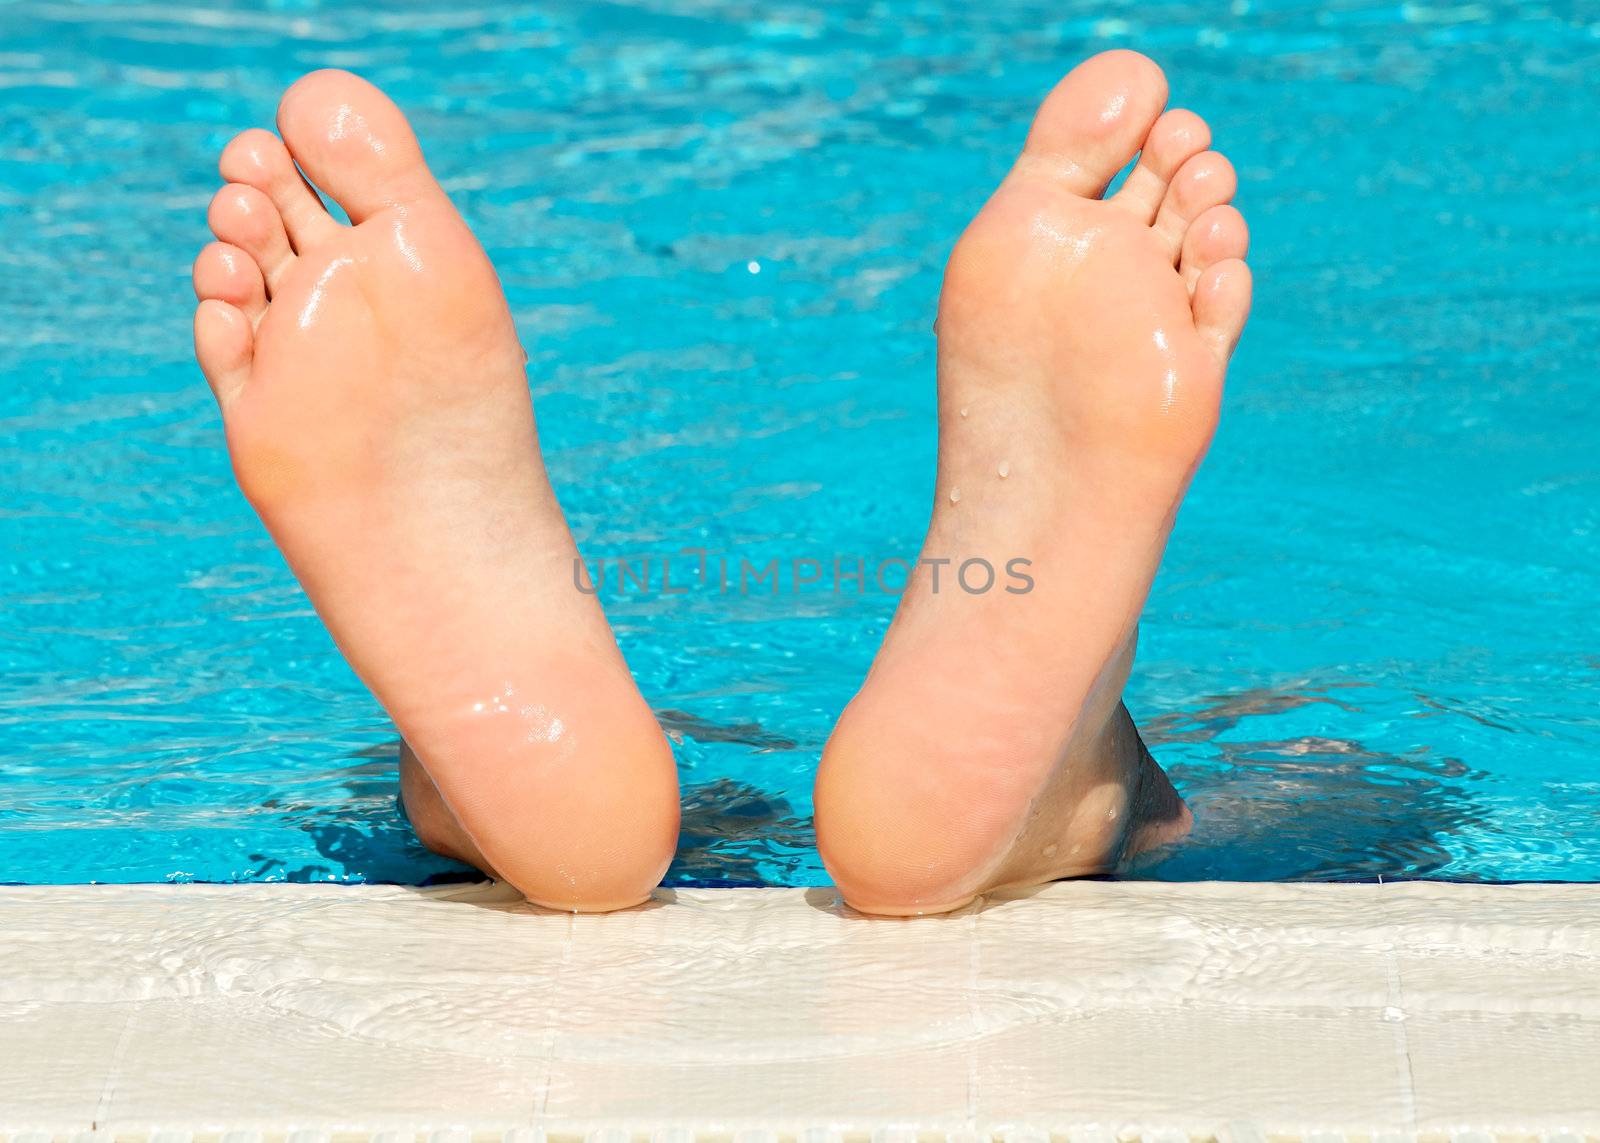 Man's feet with bright blue swimming pool background by zhekos